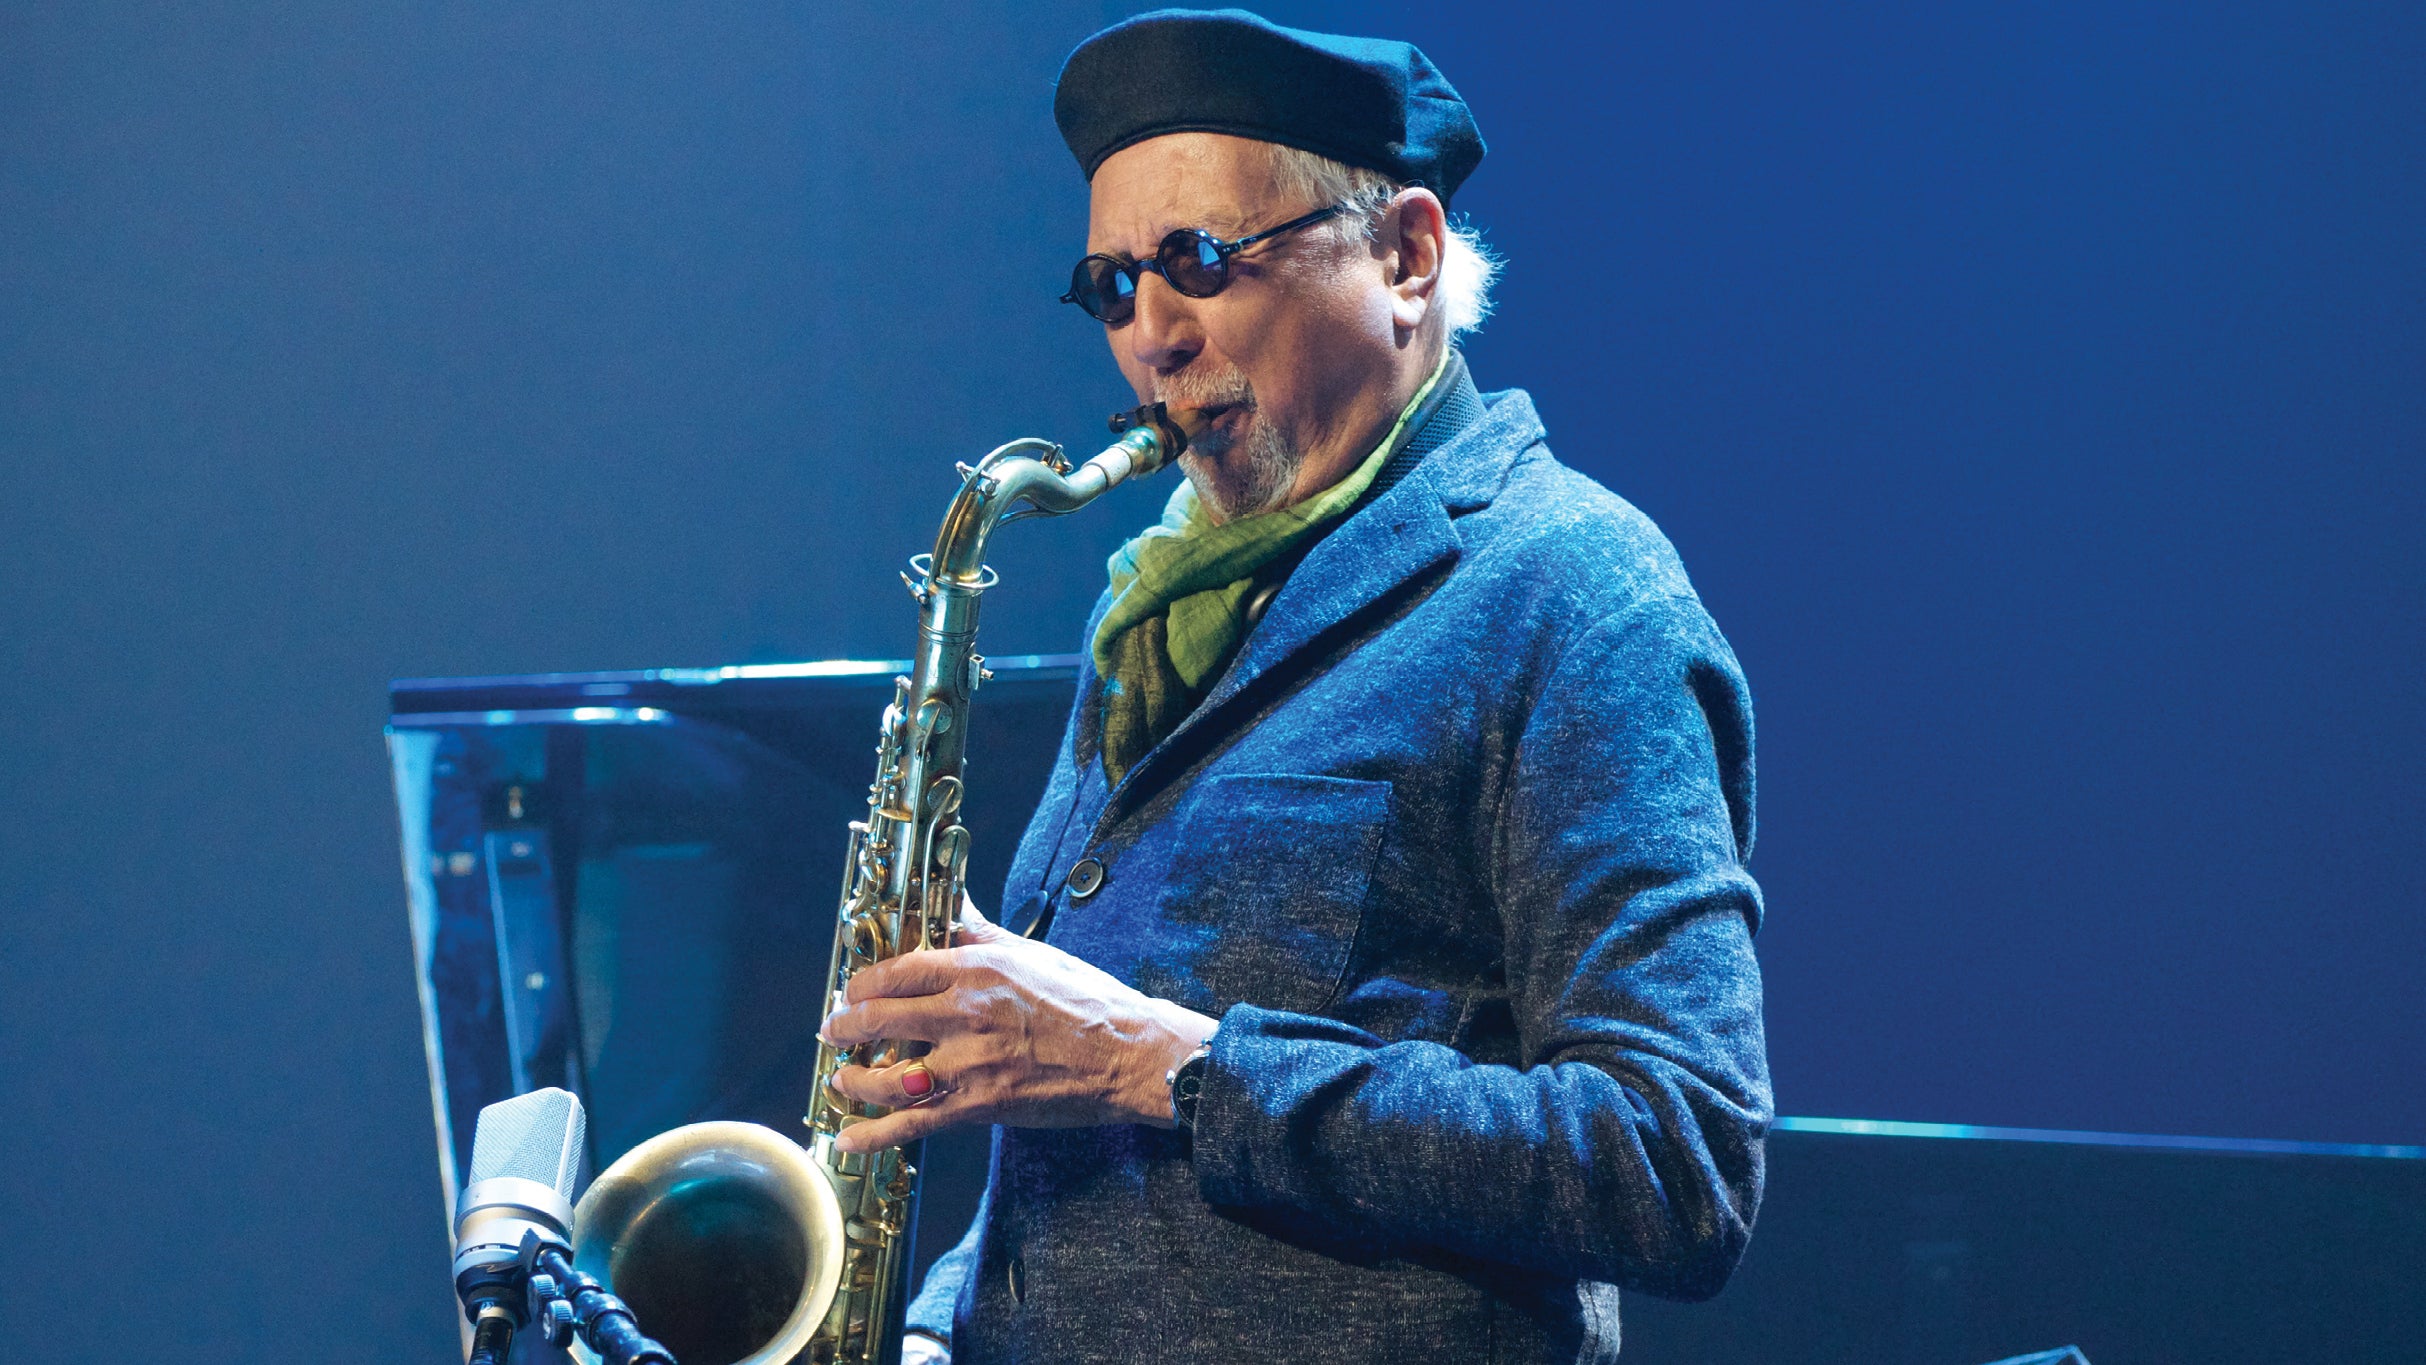 Charles Lloyd Sky Trio (Featuring Brian Blade & Larry Grenadier) in Portsmouth promo photo for Inner Circle presale offer code